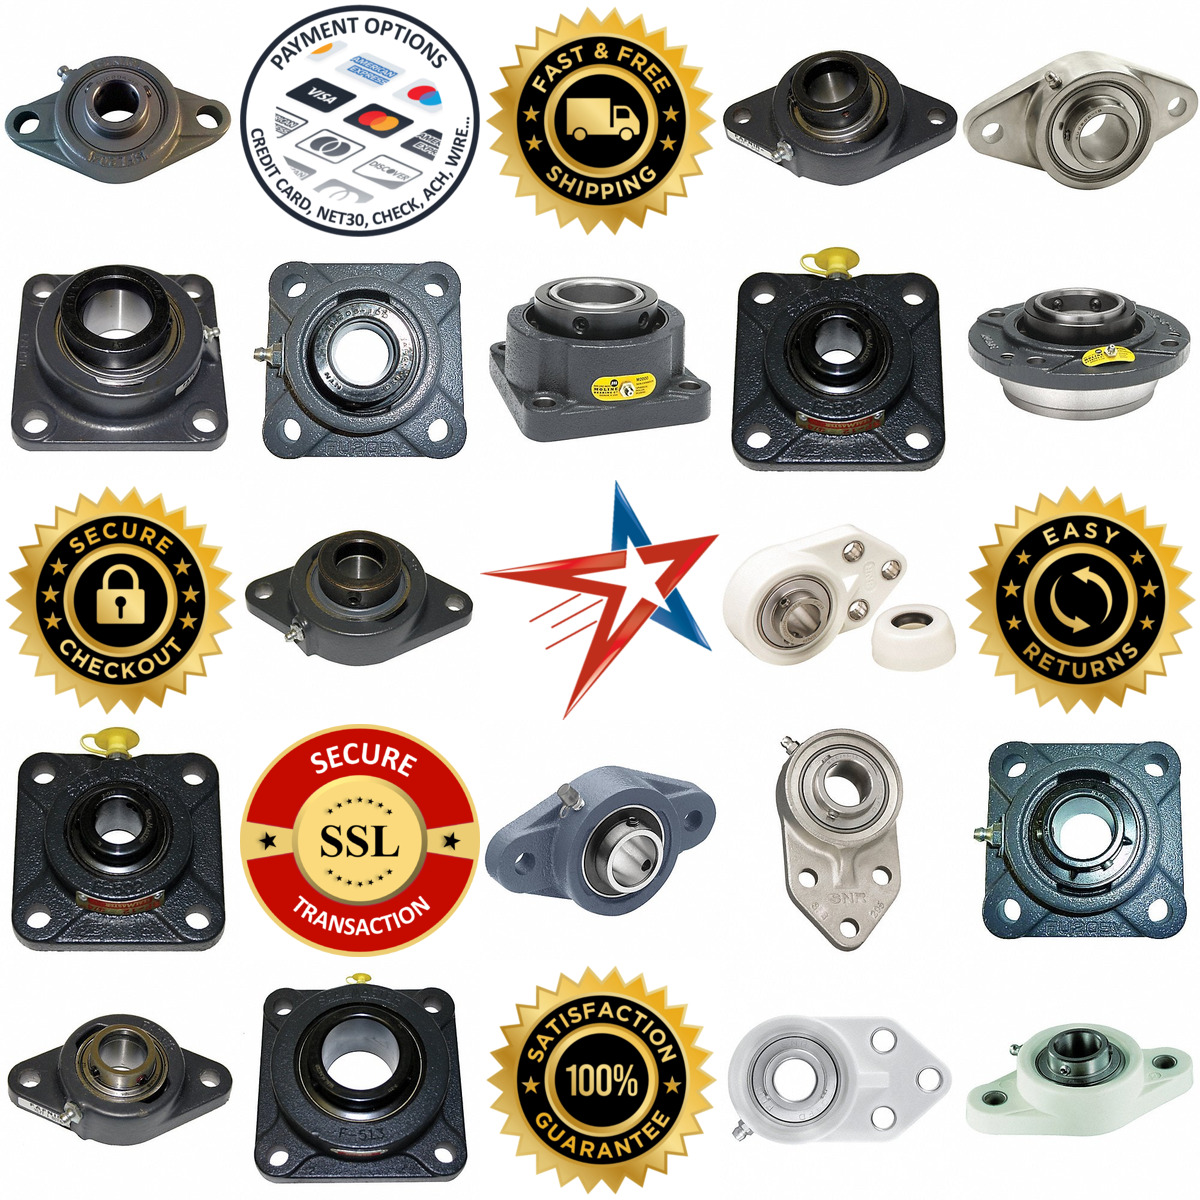 A selection of Flange Mount Bearings products on GoVets